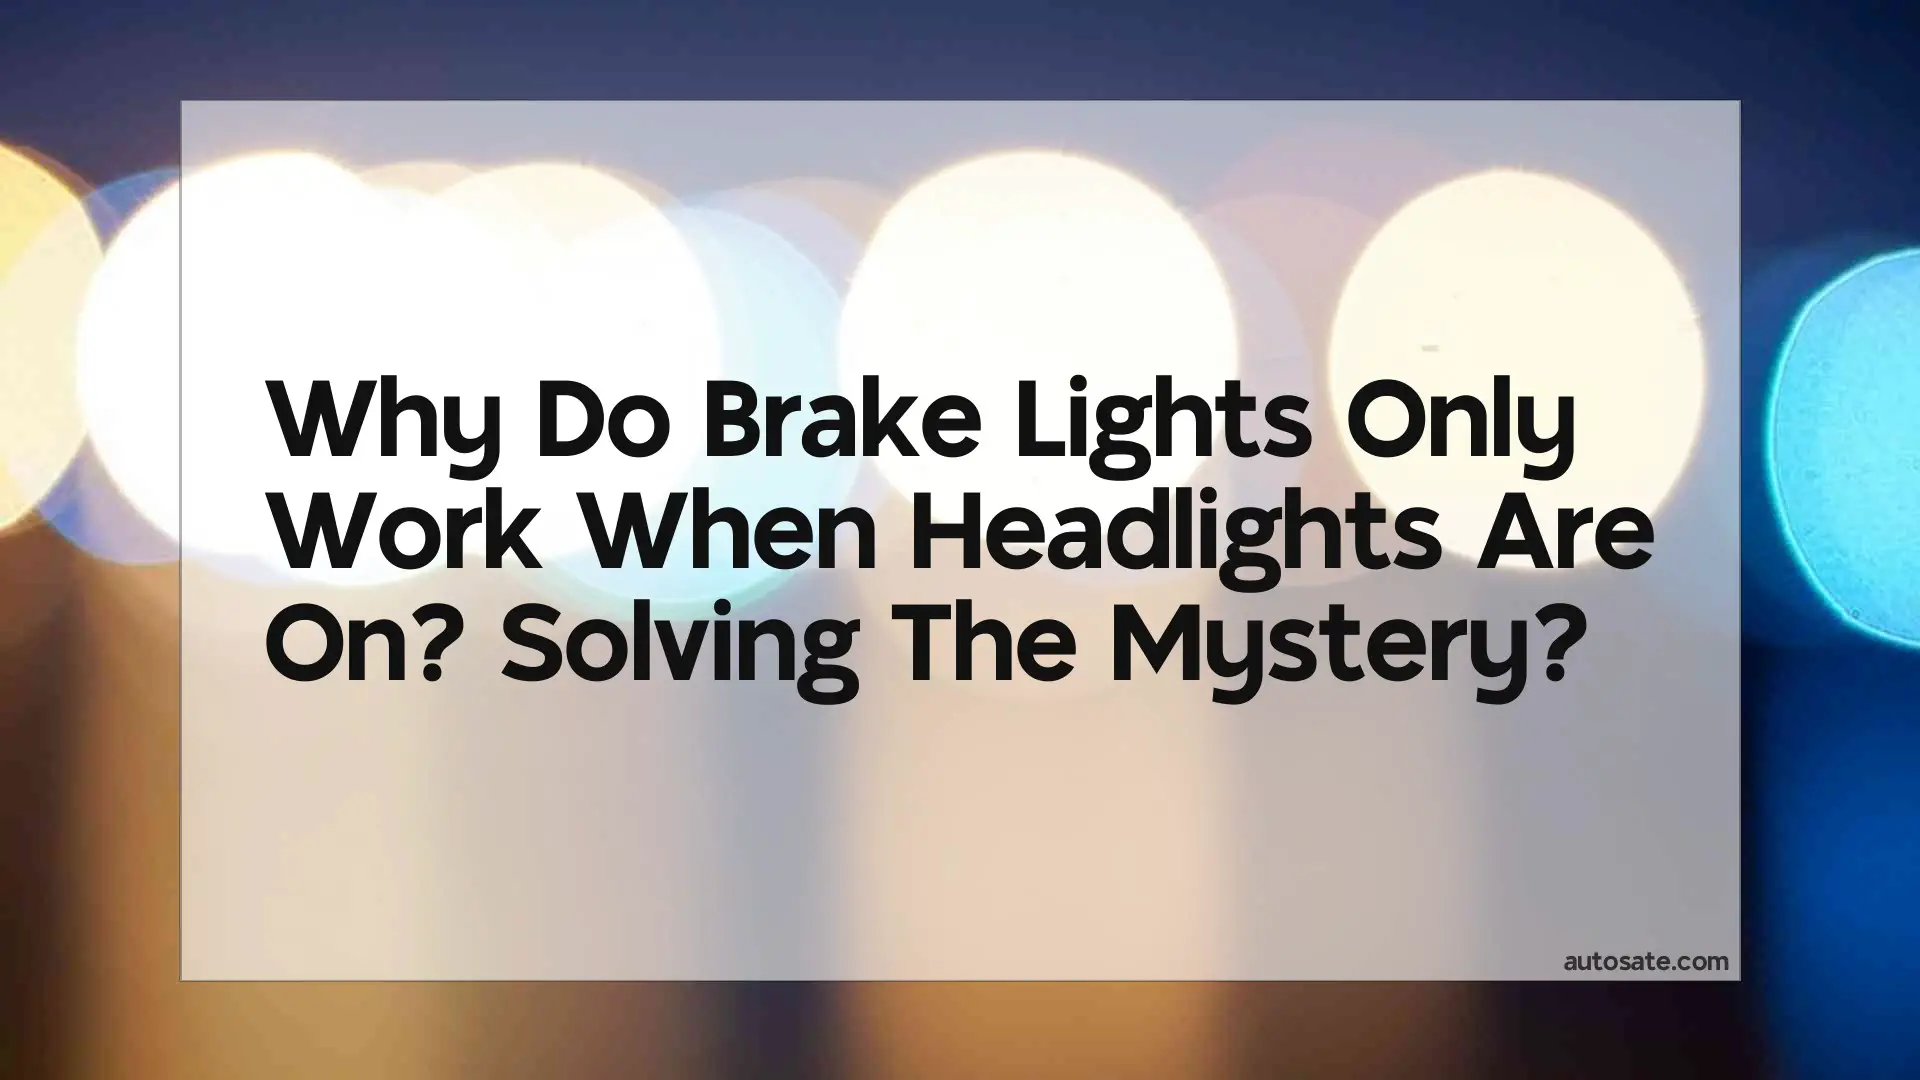 Why Do Brake Lights Only Work When Headlights Are On? Solving The Mystery